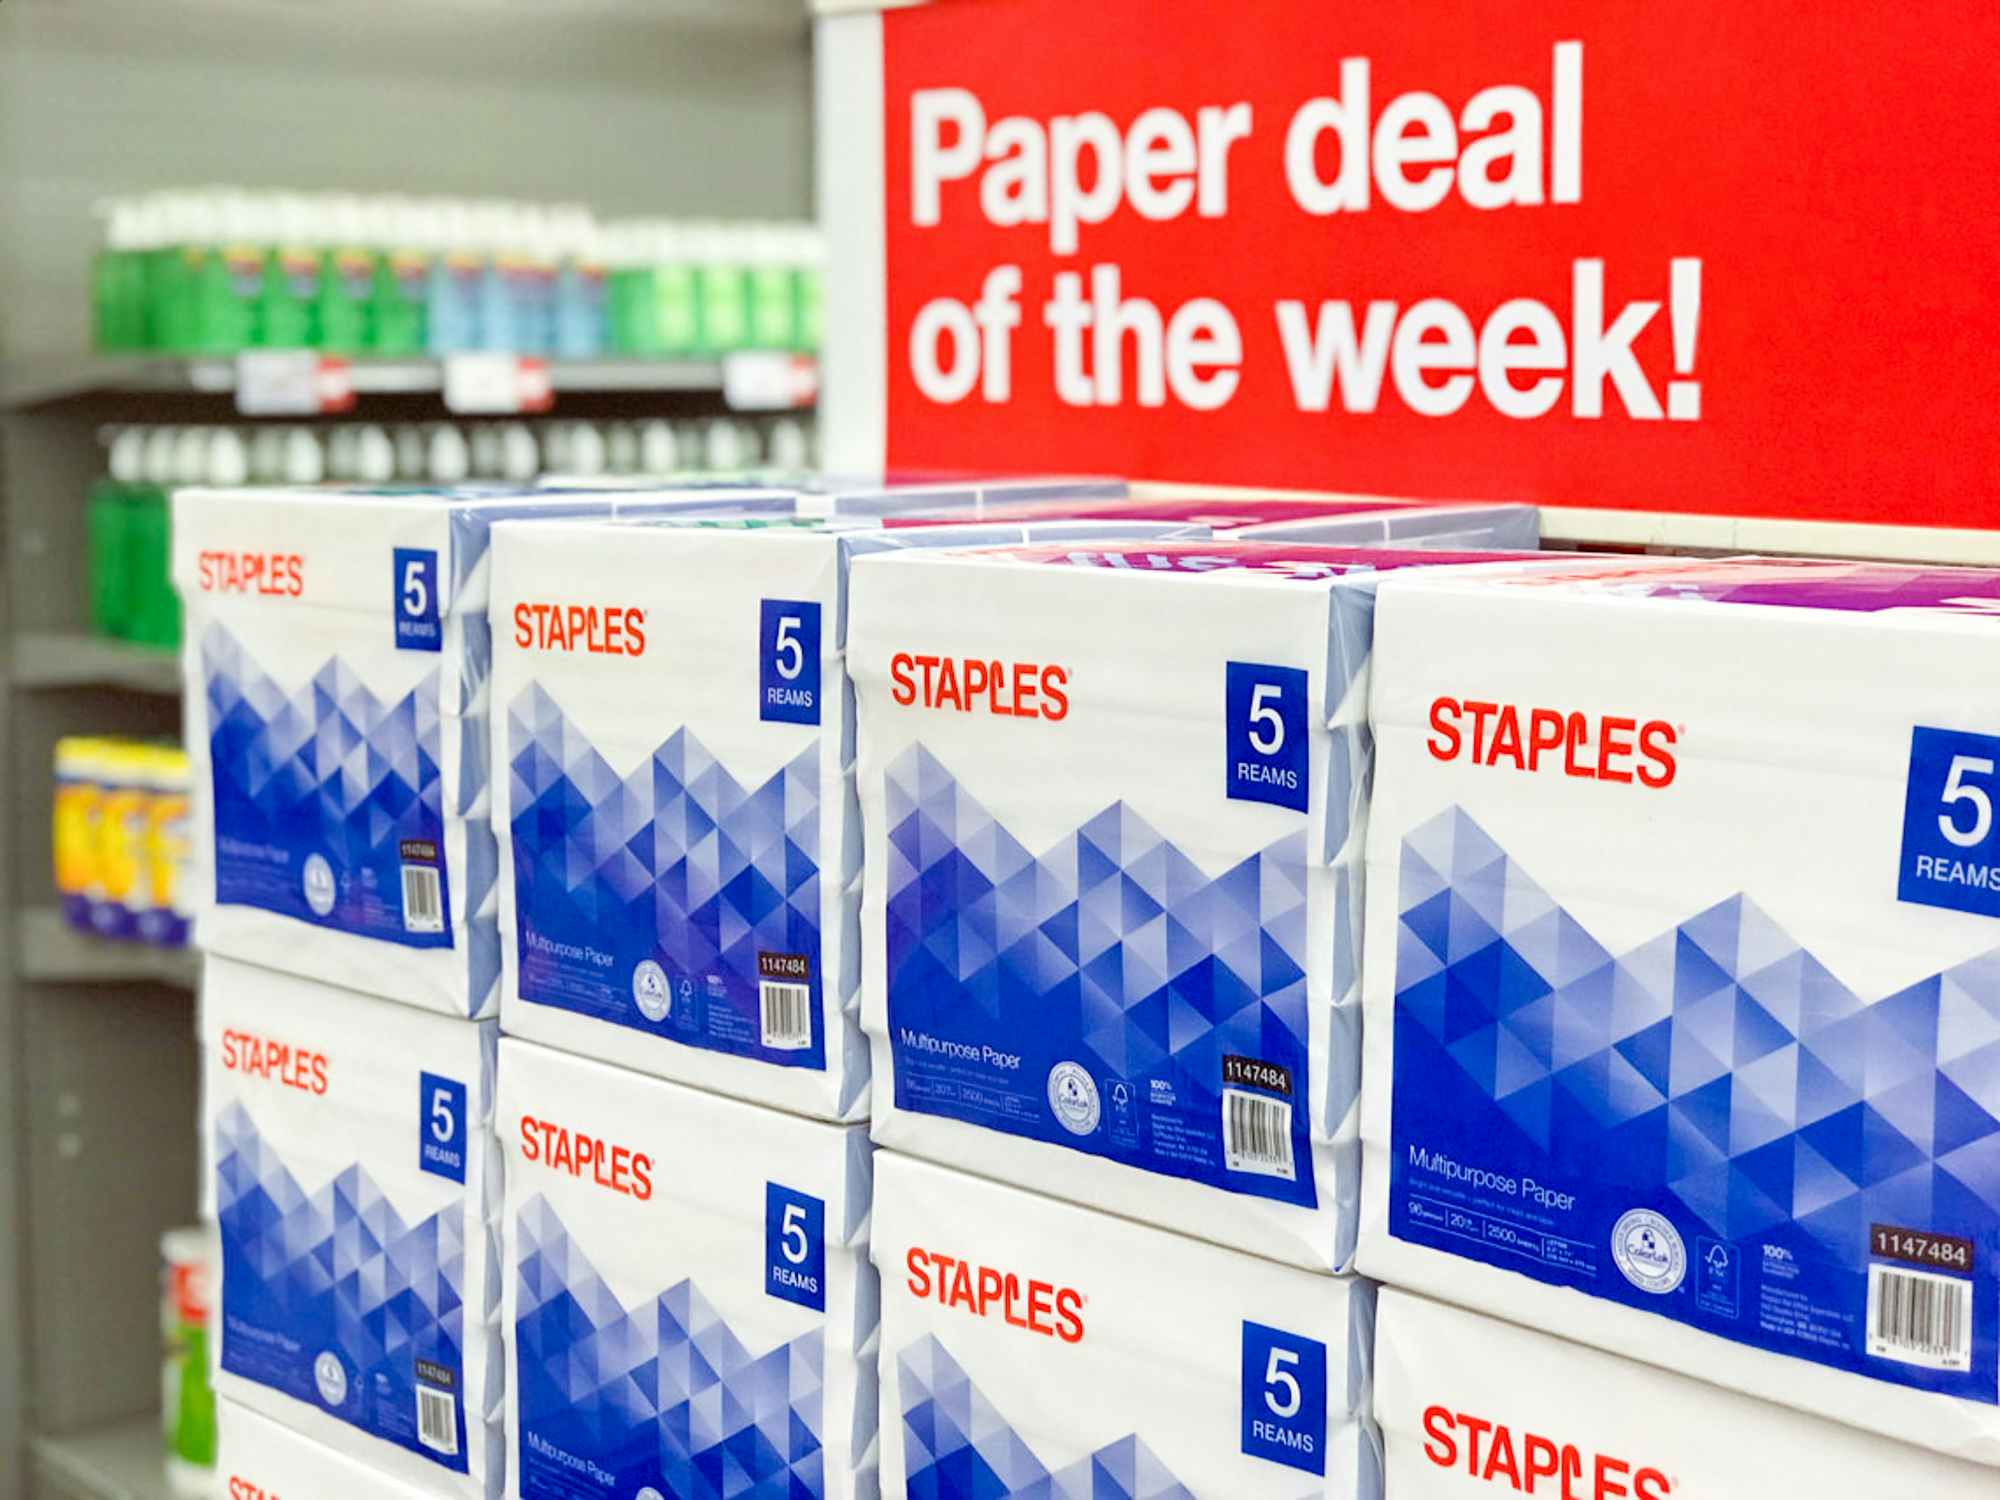 Reams of paper stocked at Staples with a sign that reads "Paper deal of the week"